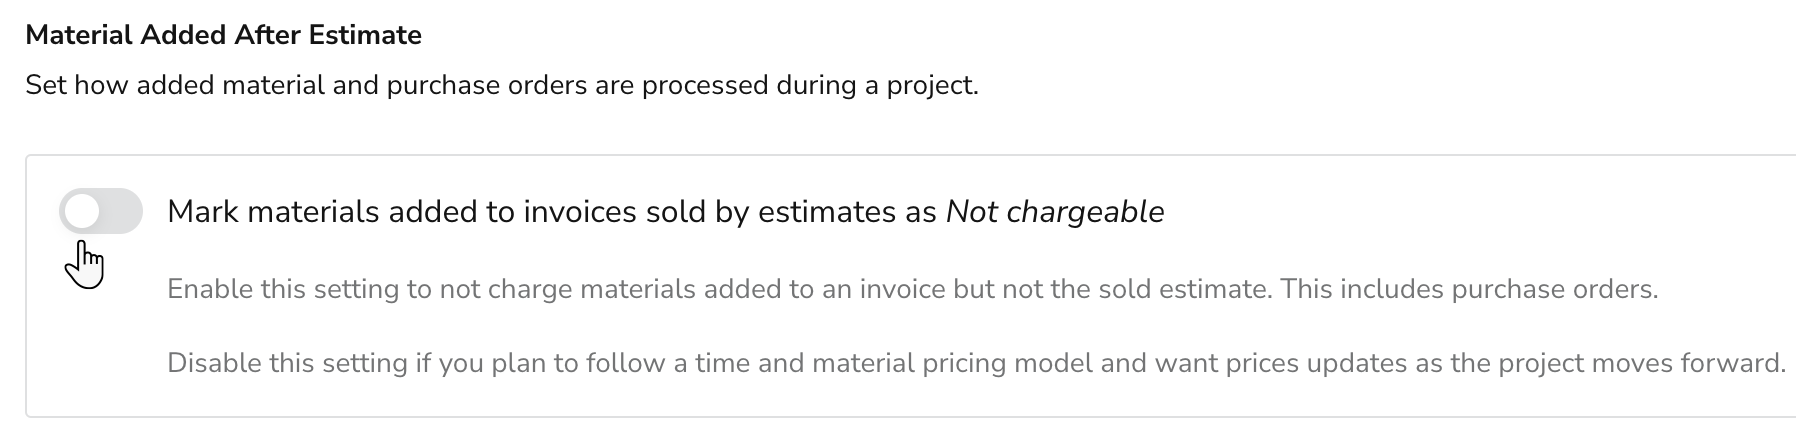 Mark materials added to invoices sold by estimates as non chargeable